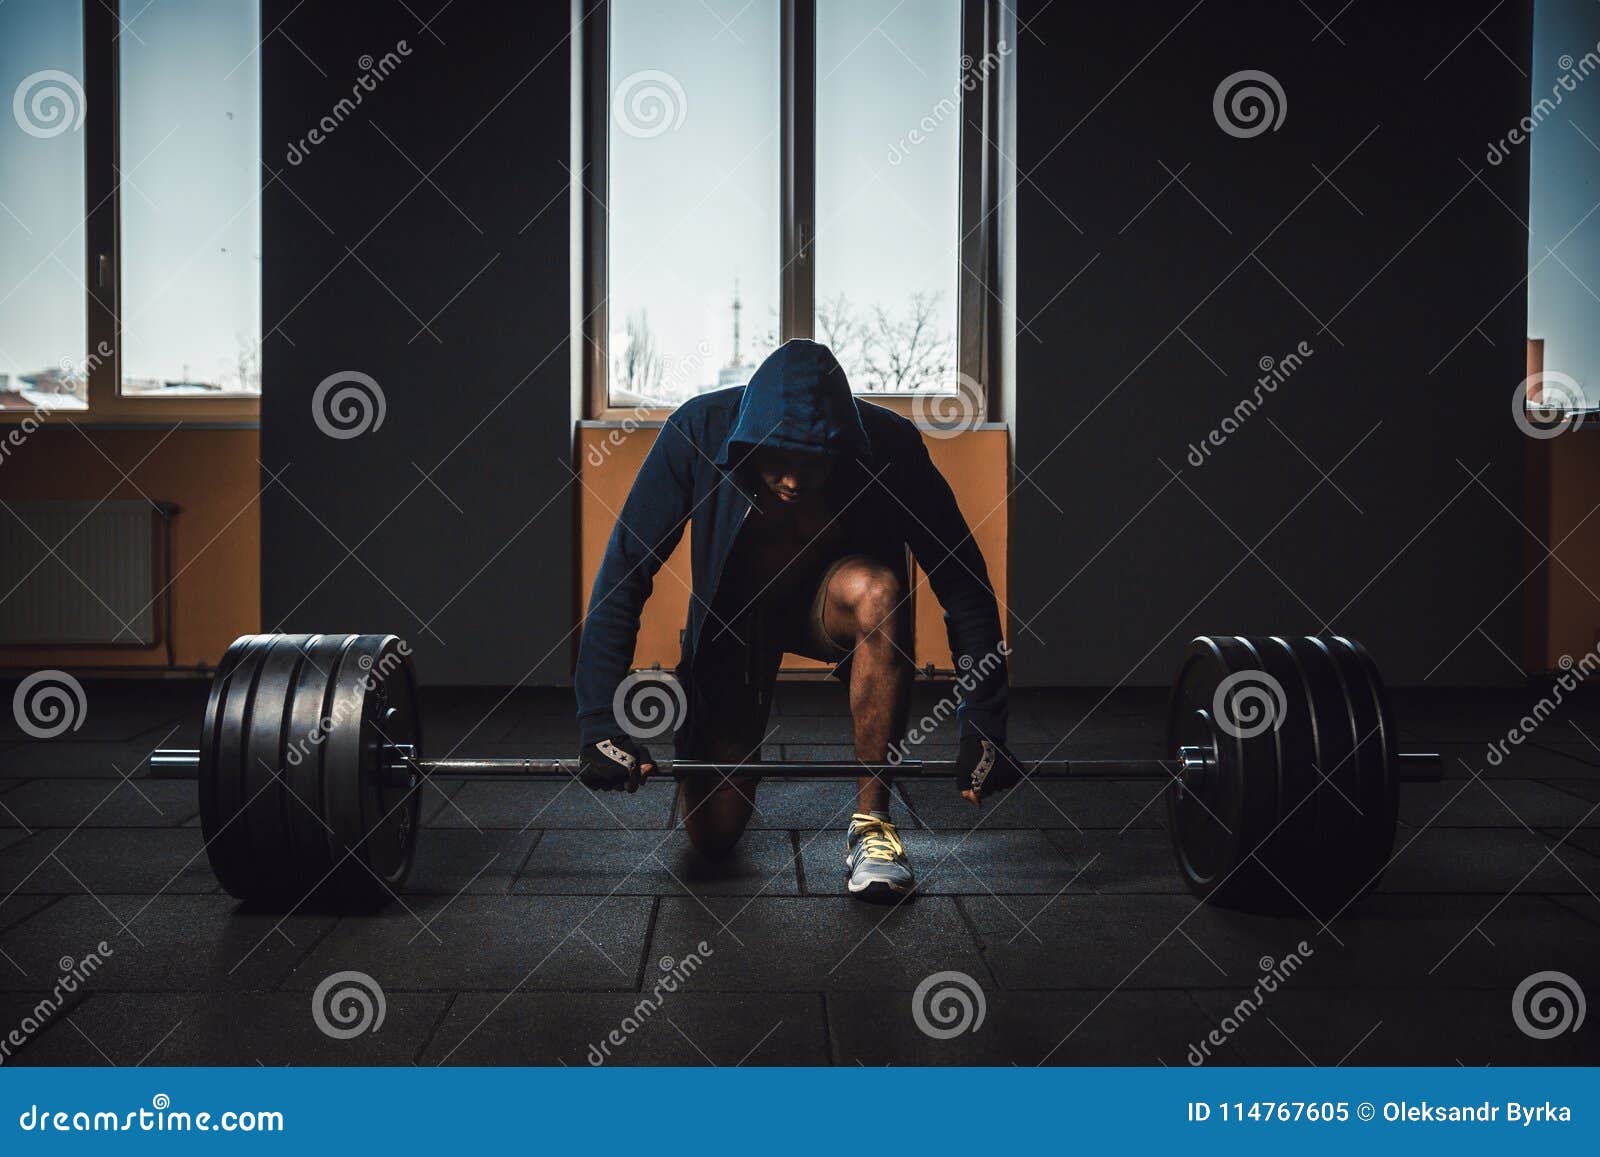 athletic man in jacket with a hood waiting and preparing before lifting heavy barbell. fitness, sport, training, gym and lifestyle